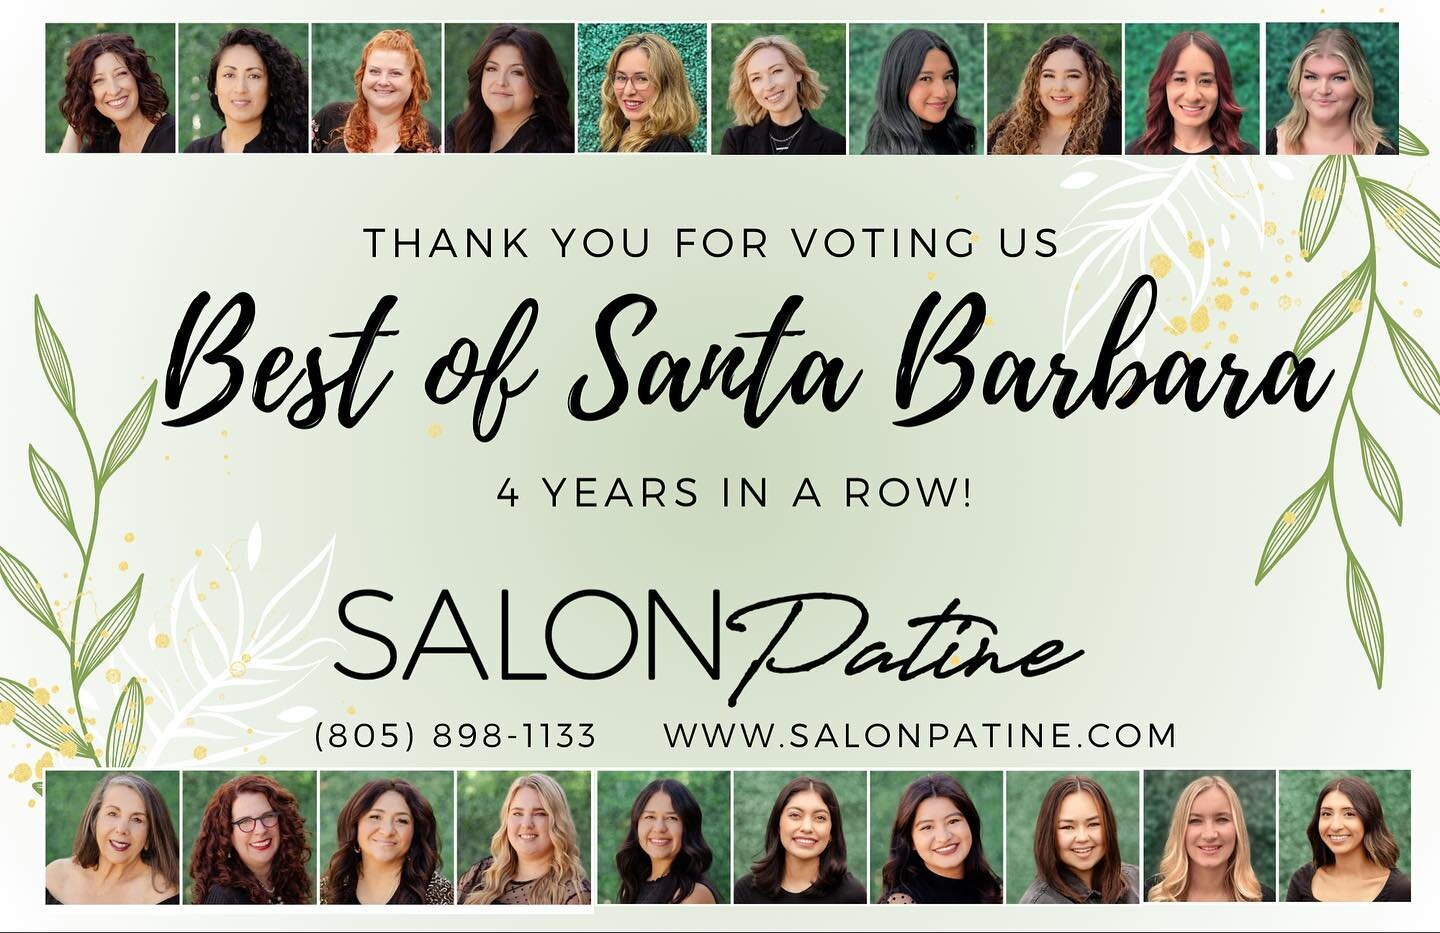 We are excited to announce that we were voted The Best of Santa Barbara 2023!!! Thank you so much for your votes and continued support! We couldn&rsquo;t have done this without you ❤️ 

Make sure to stop by Salon Patine today to celebrate with us!